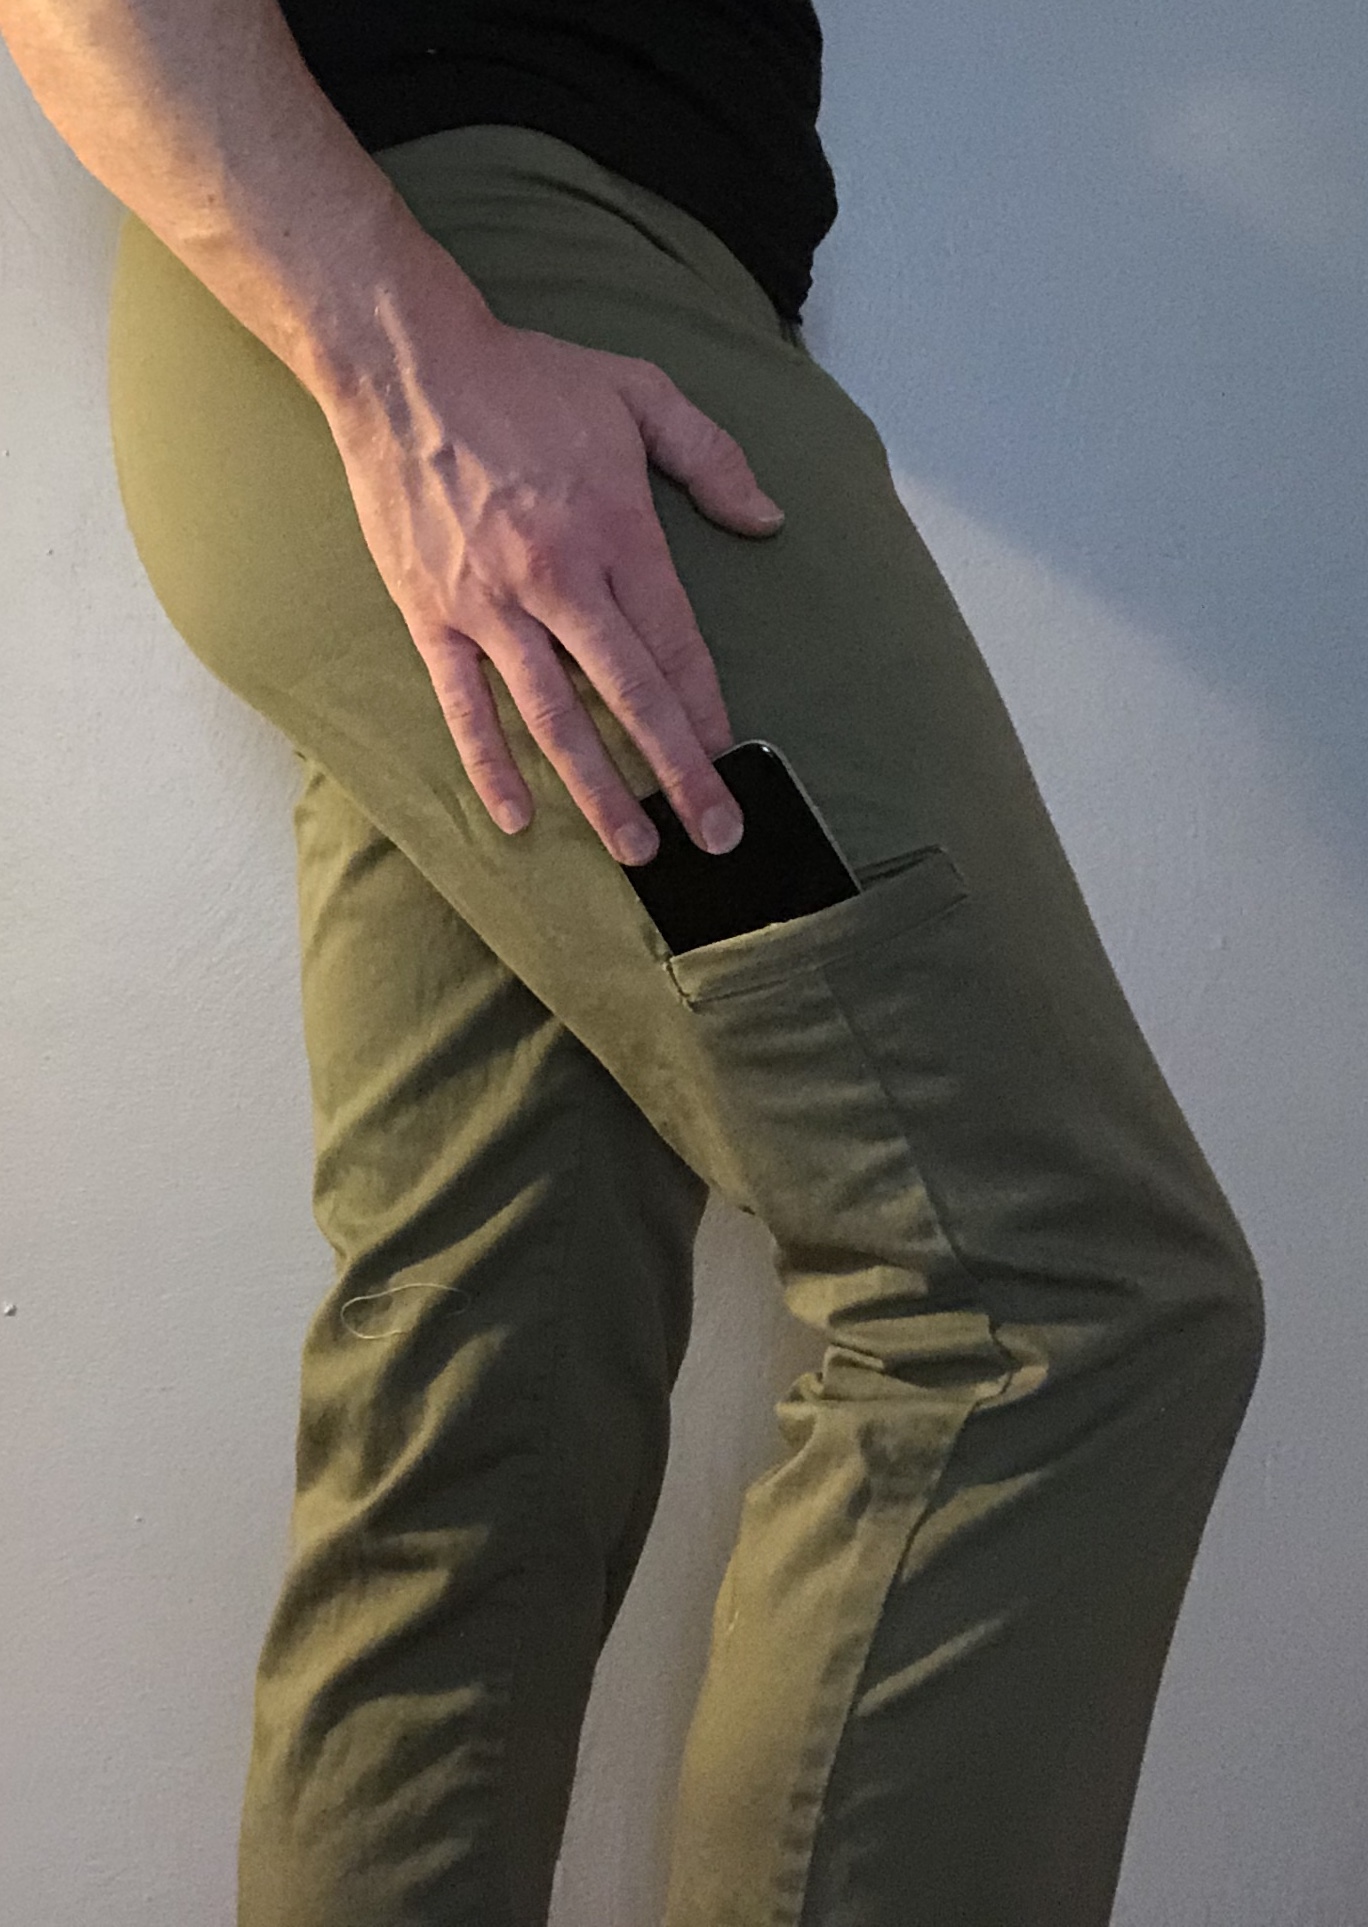 First pair of pants.